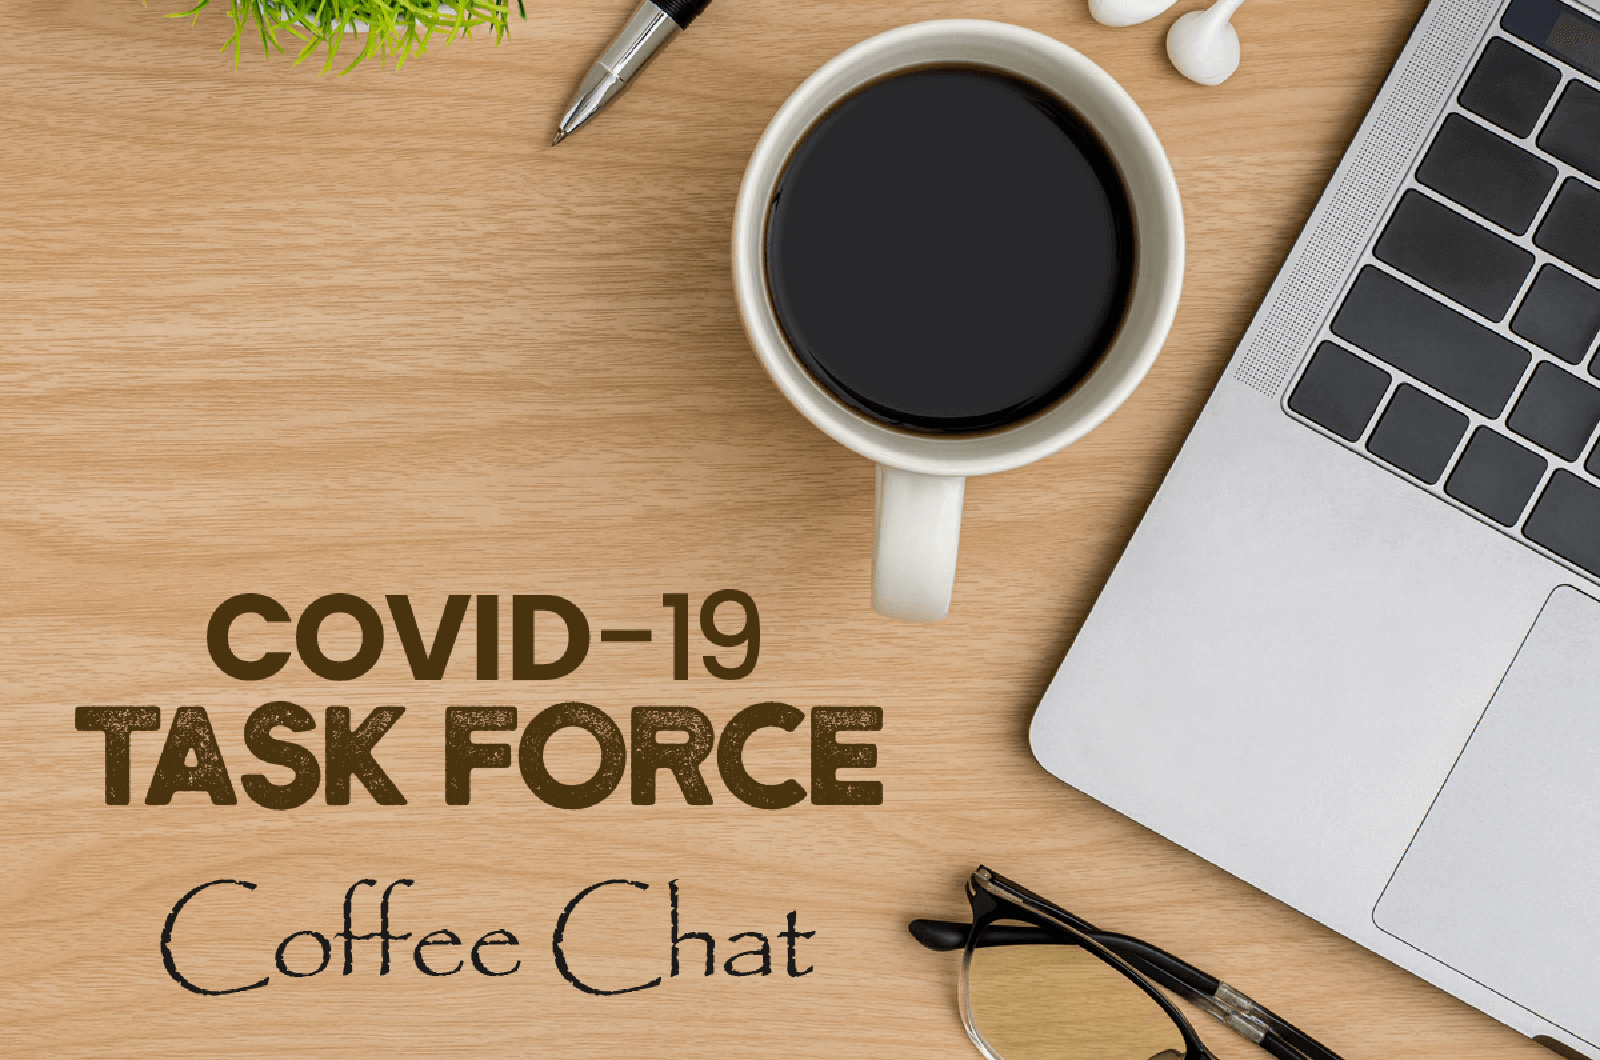 Task Force Coffee Chat: January 12, 2022